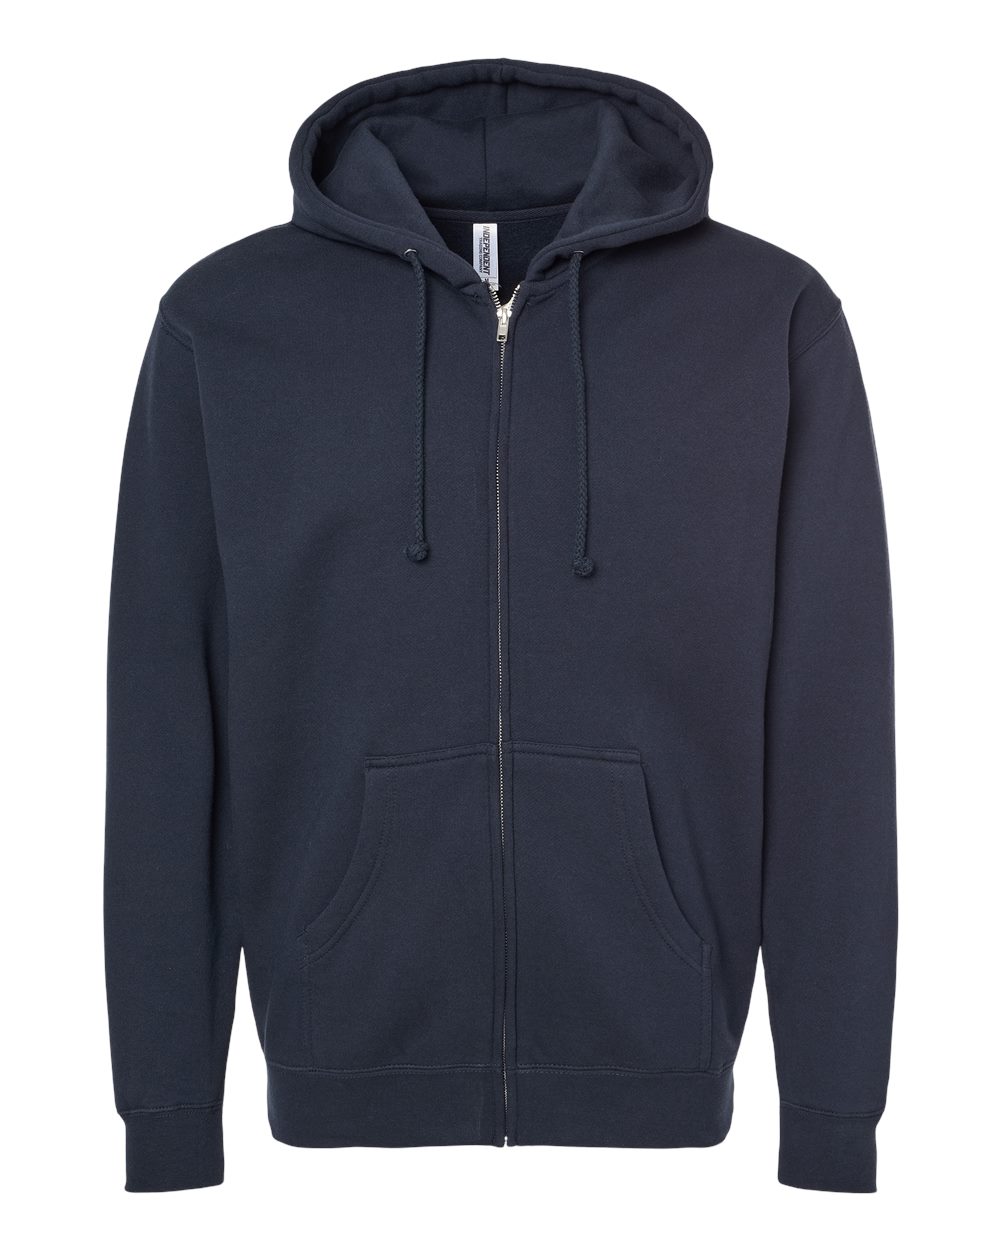 Independent Trading Co Mens Hooded Full-Zip Sweatshirt IND4000Z up to ...